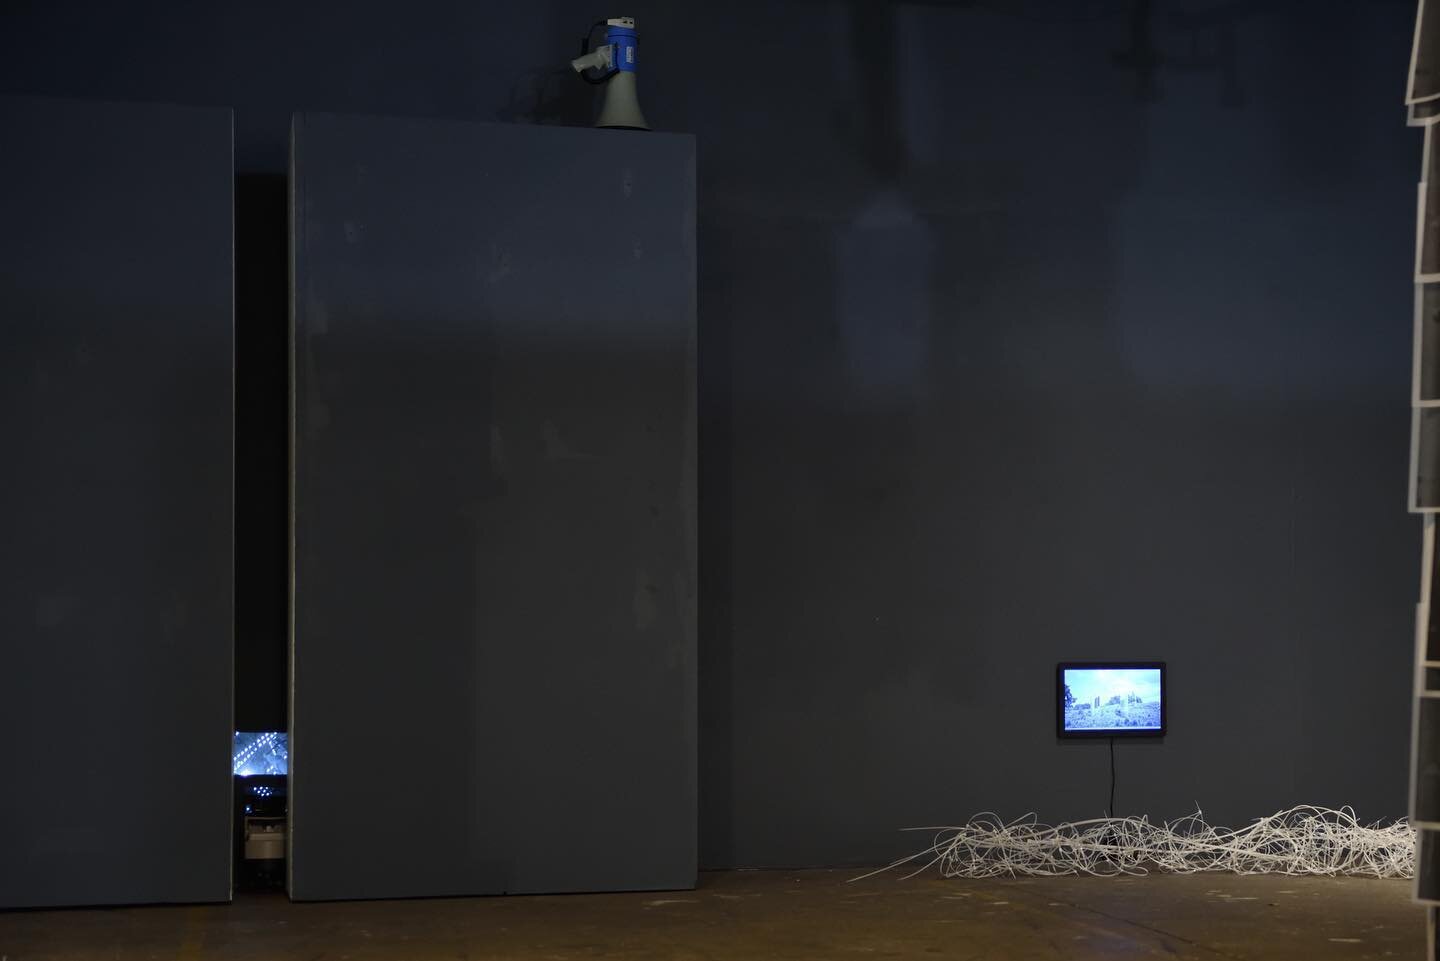 Elaine WONG
Moving Garden
Motor device, video projection
Dimension variable 
#107redfern